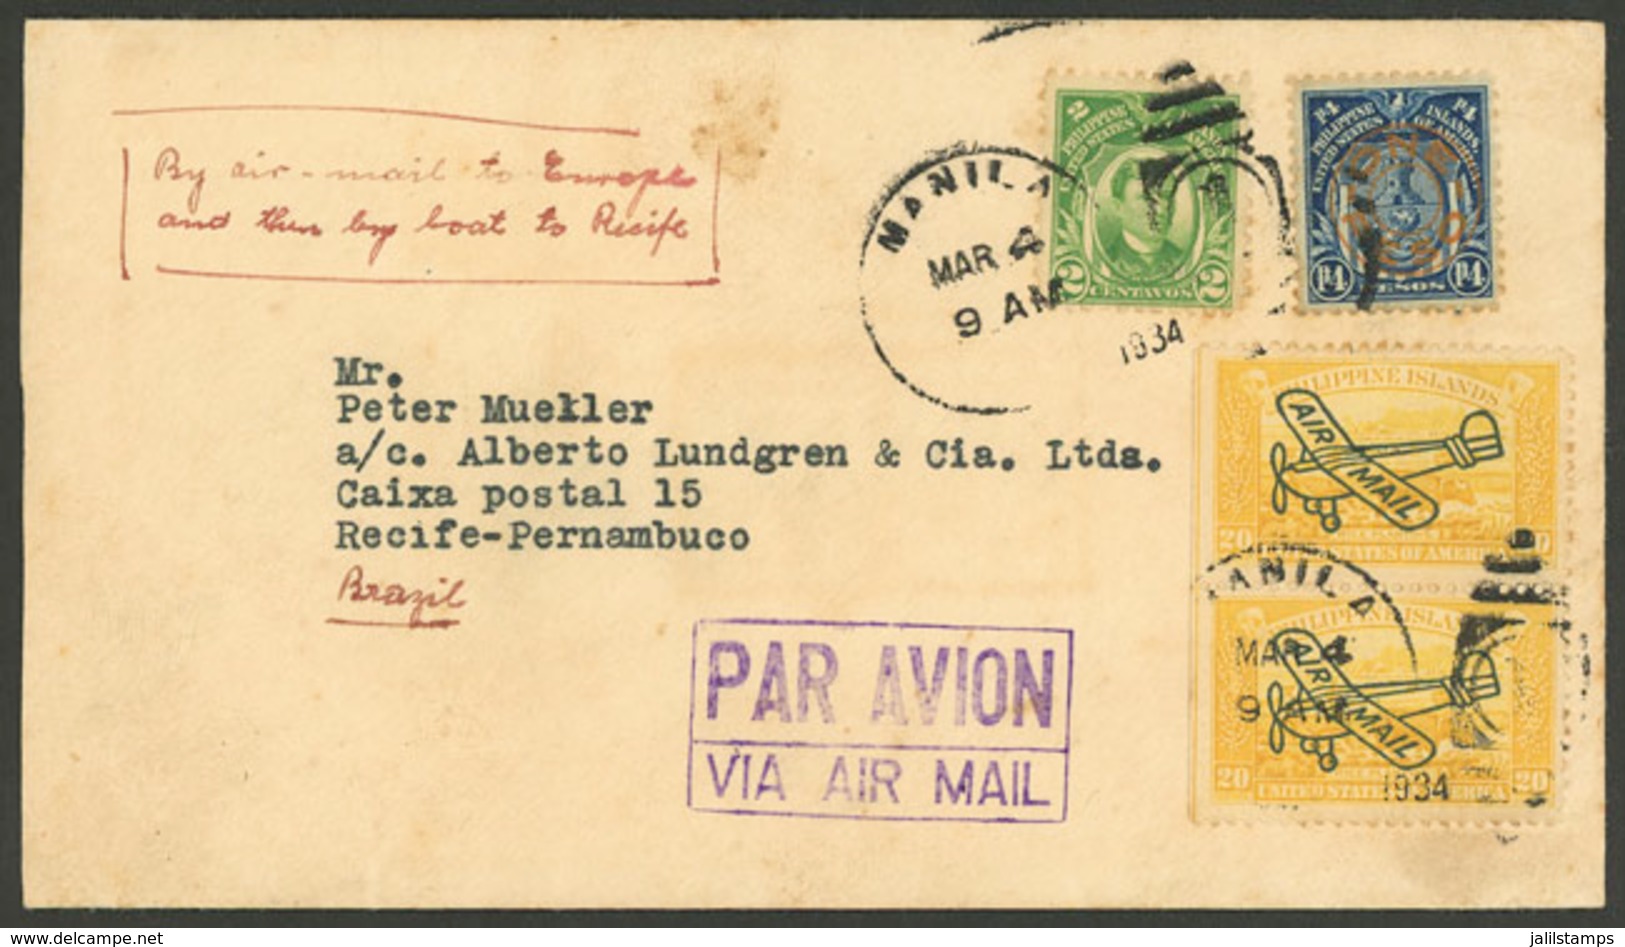 PHILIPPINES: Airmail Cover Sent From Manila To Brazil On 4/MAR/1934, Nice Postage, Very Rare Destination! - Philippines